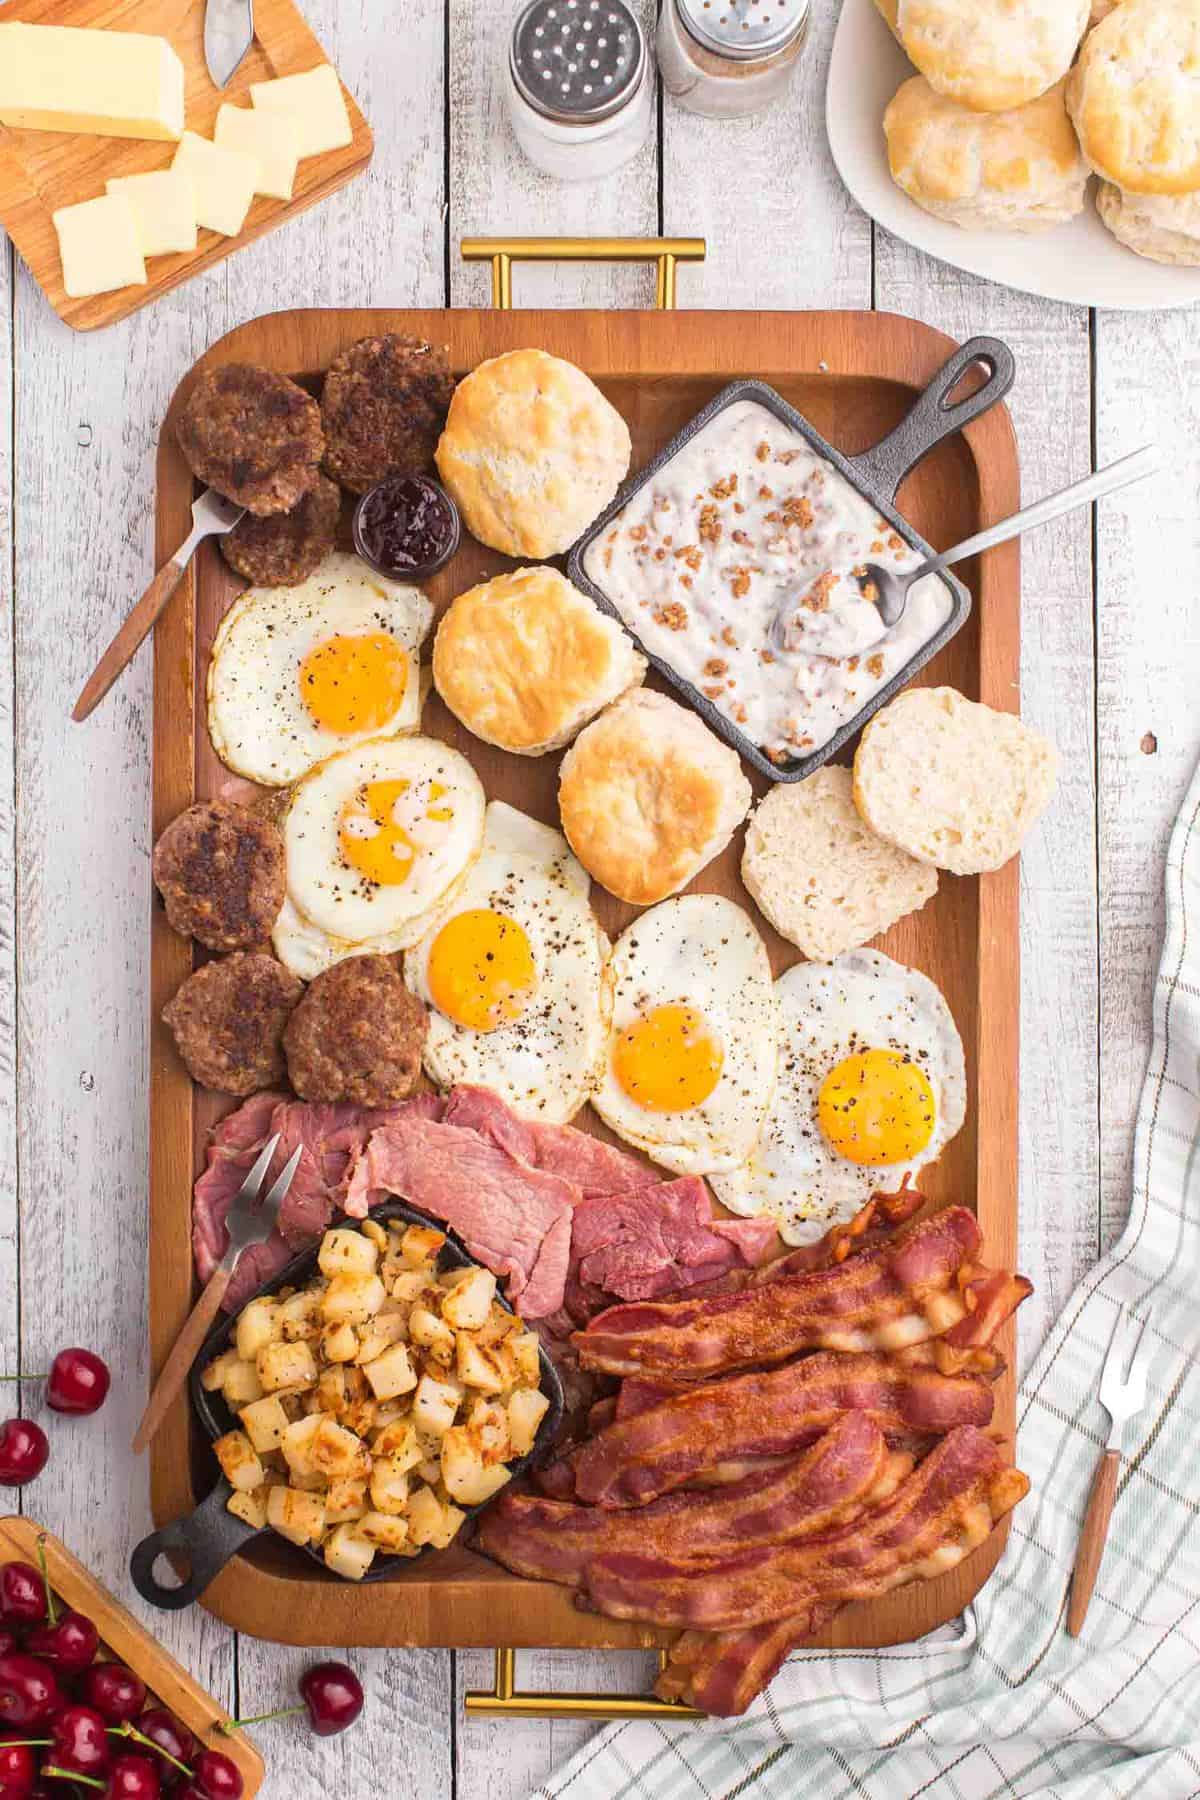 Overhead view of meat, eggs, sausage, potatoes, and biscuits on a large wooden tray.